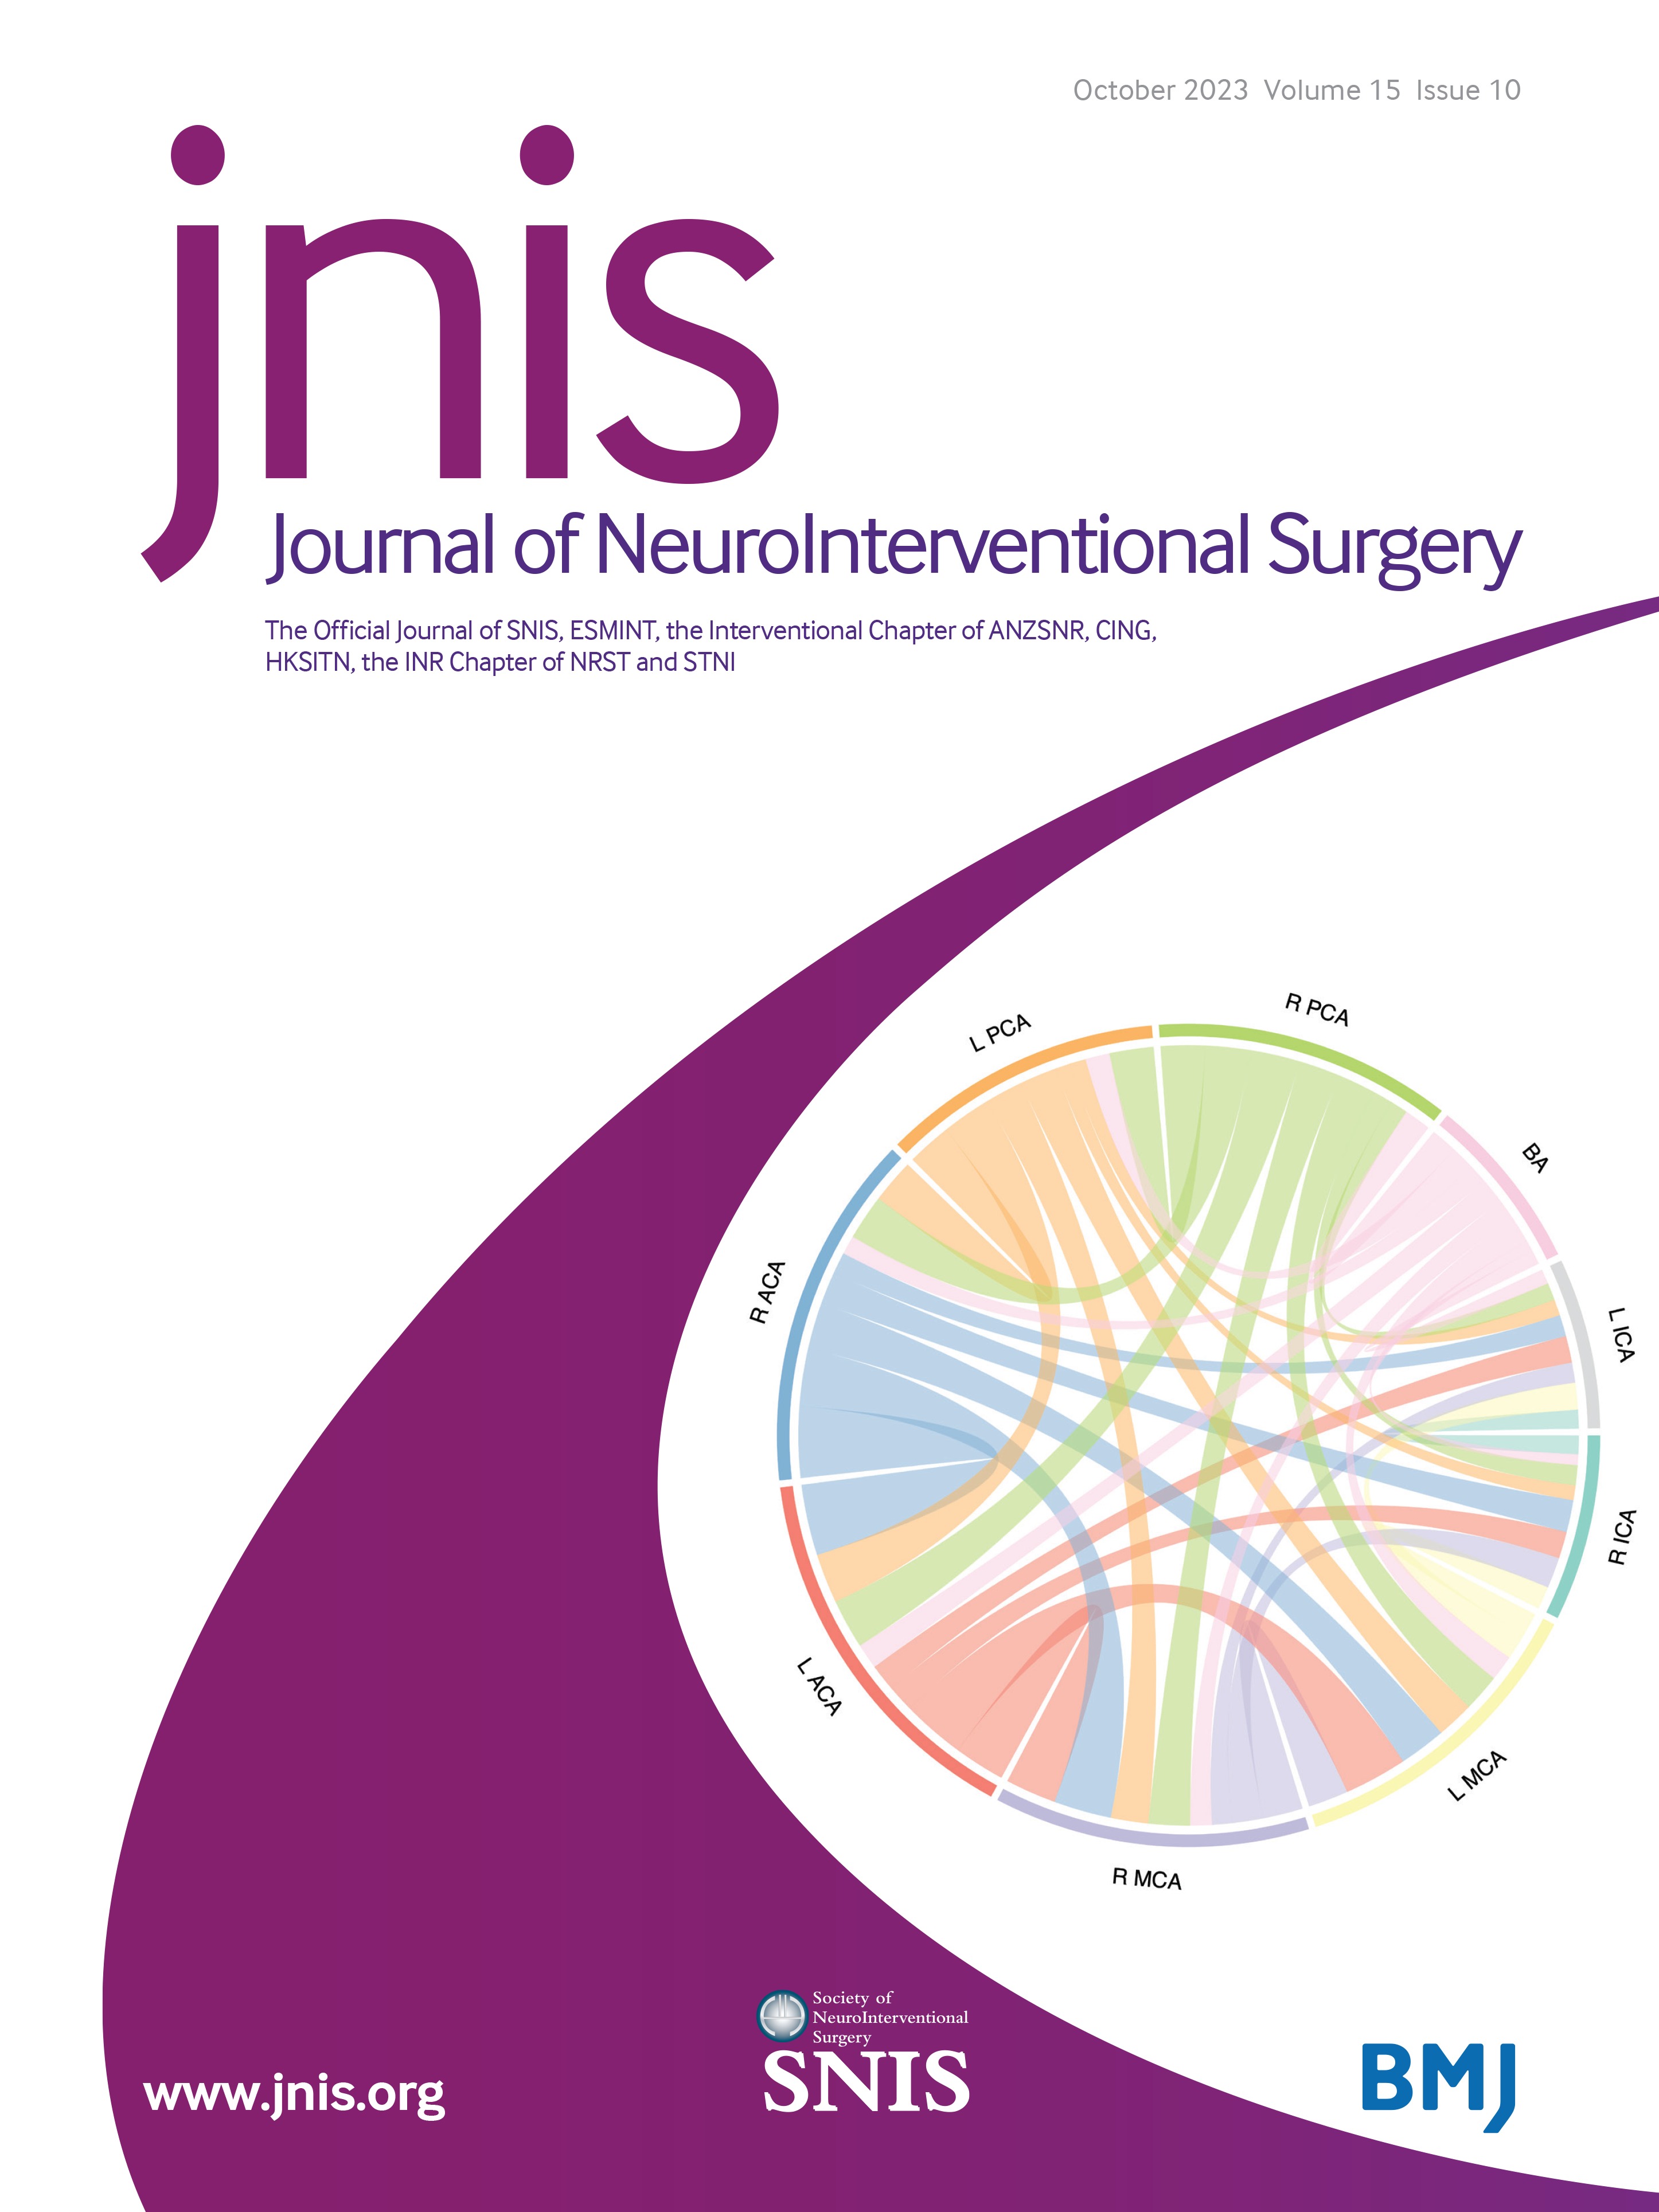 A new method for assessing transverse sinus stenosis with CT venography based on the venous trans-stenotic pressure gradient